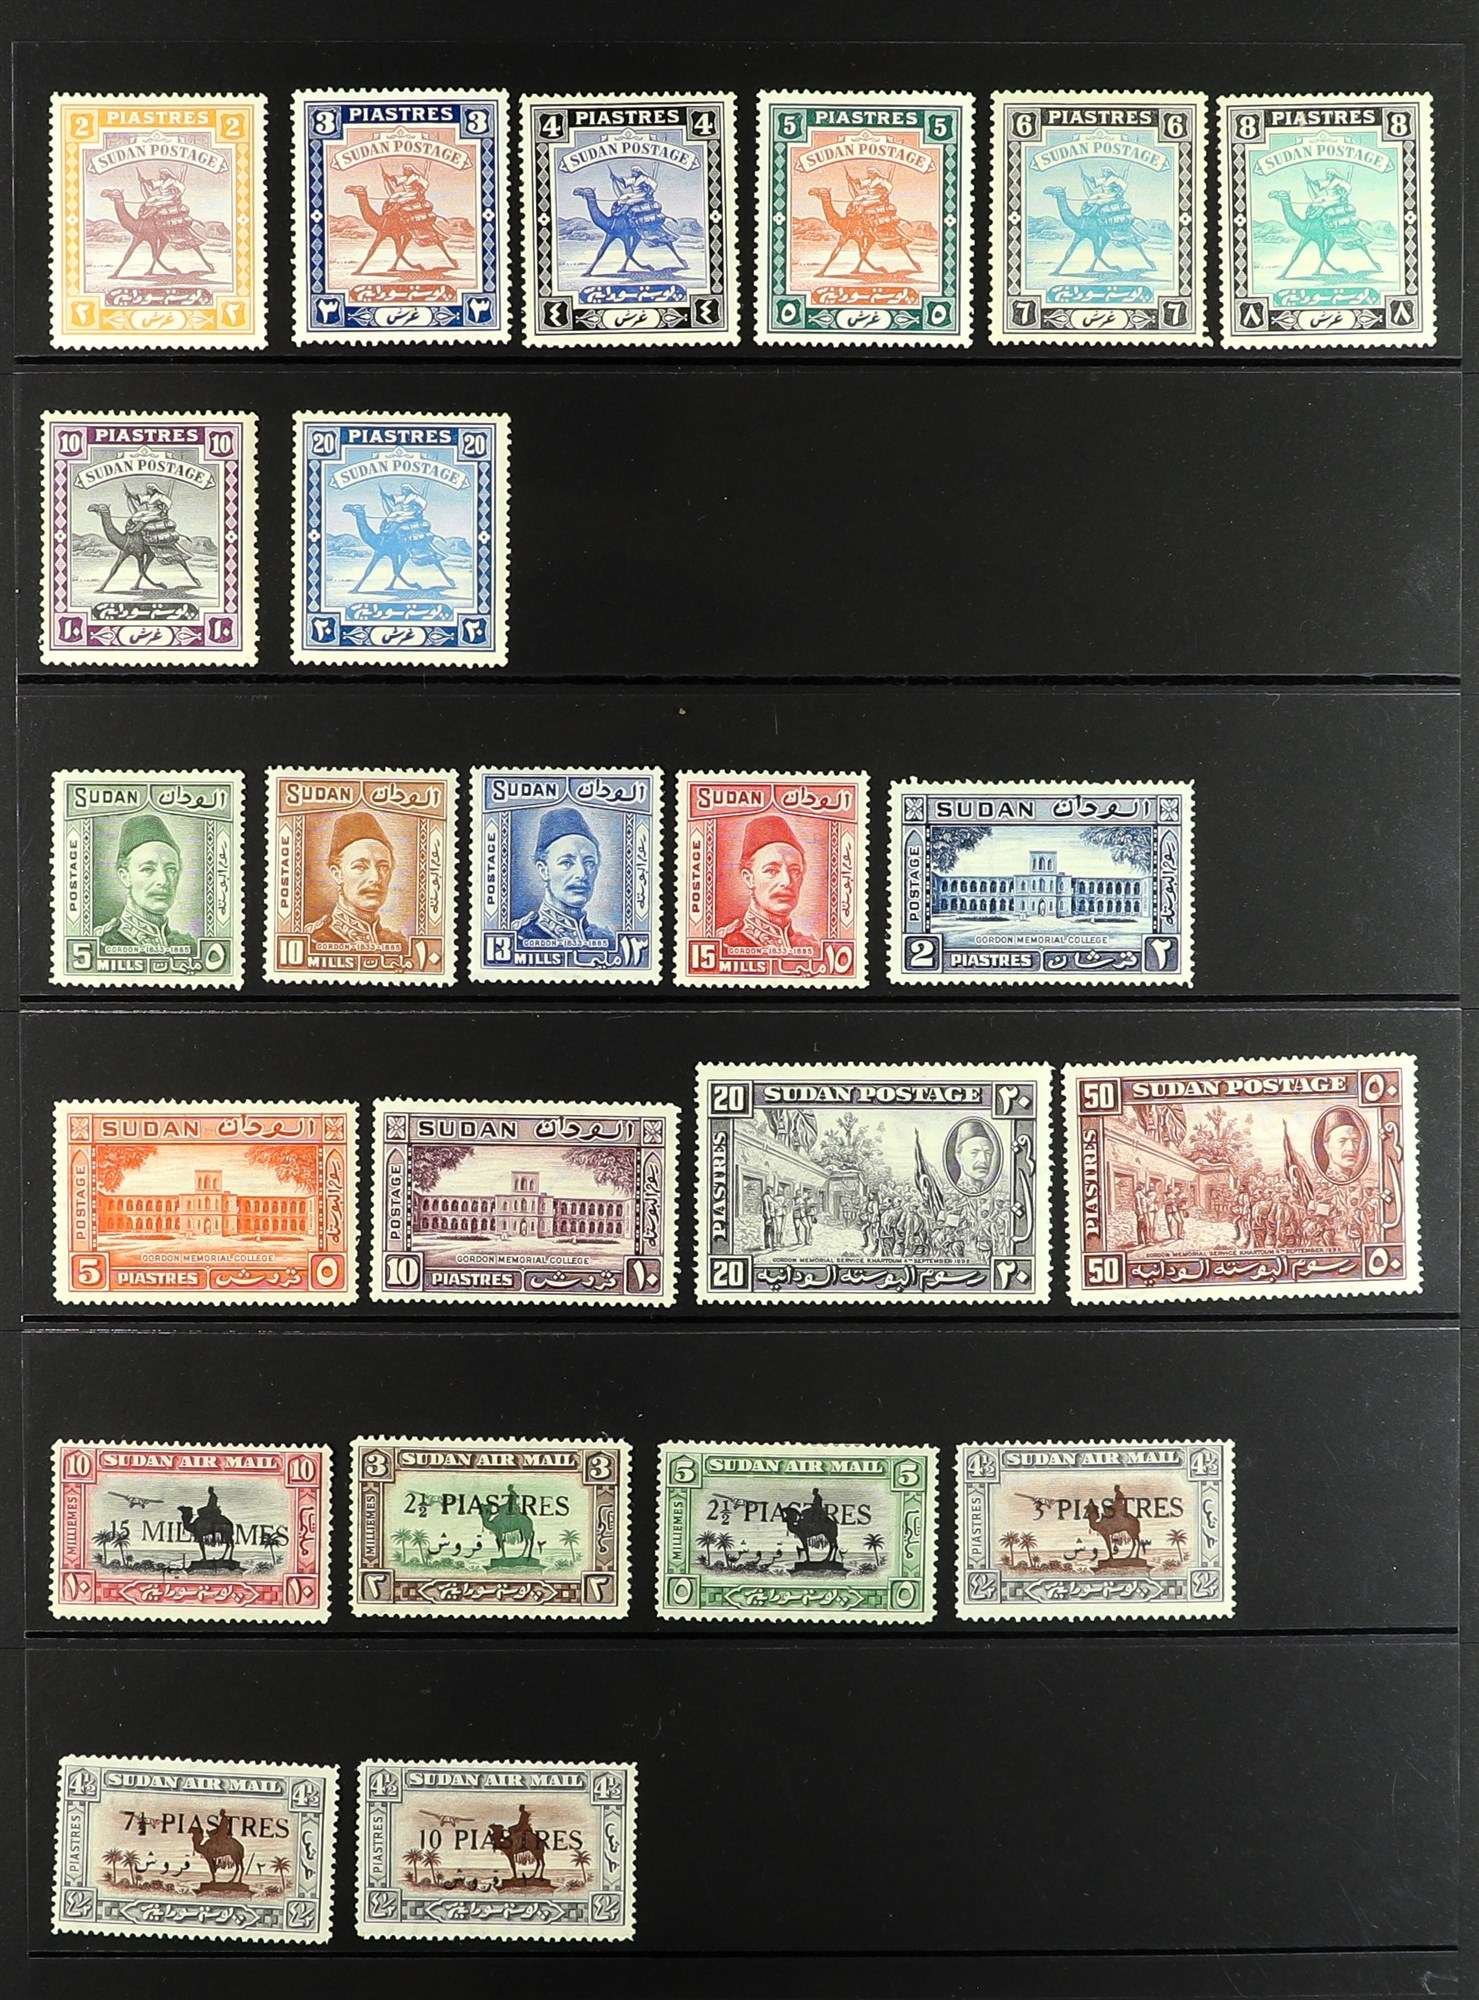 SUDAN 1898 - 1961 COLLECTION of 127 mint stamps on protective pages, note 1898, 1902-21, 1921-23 and